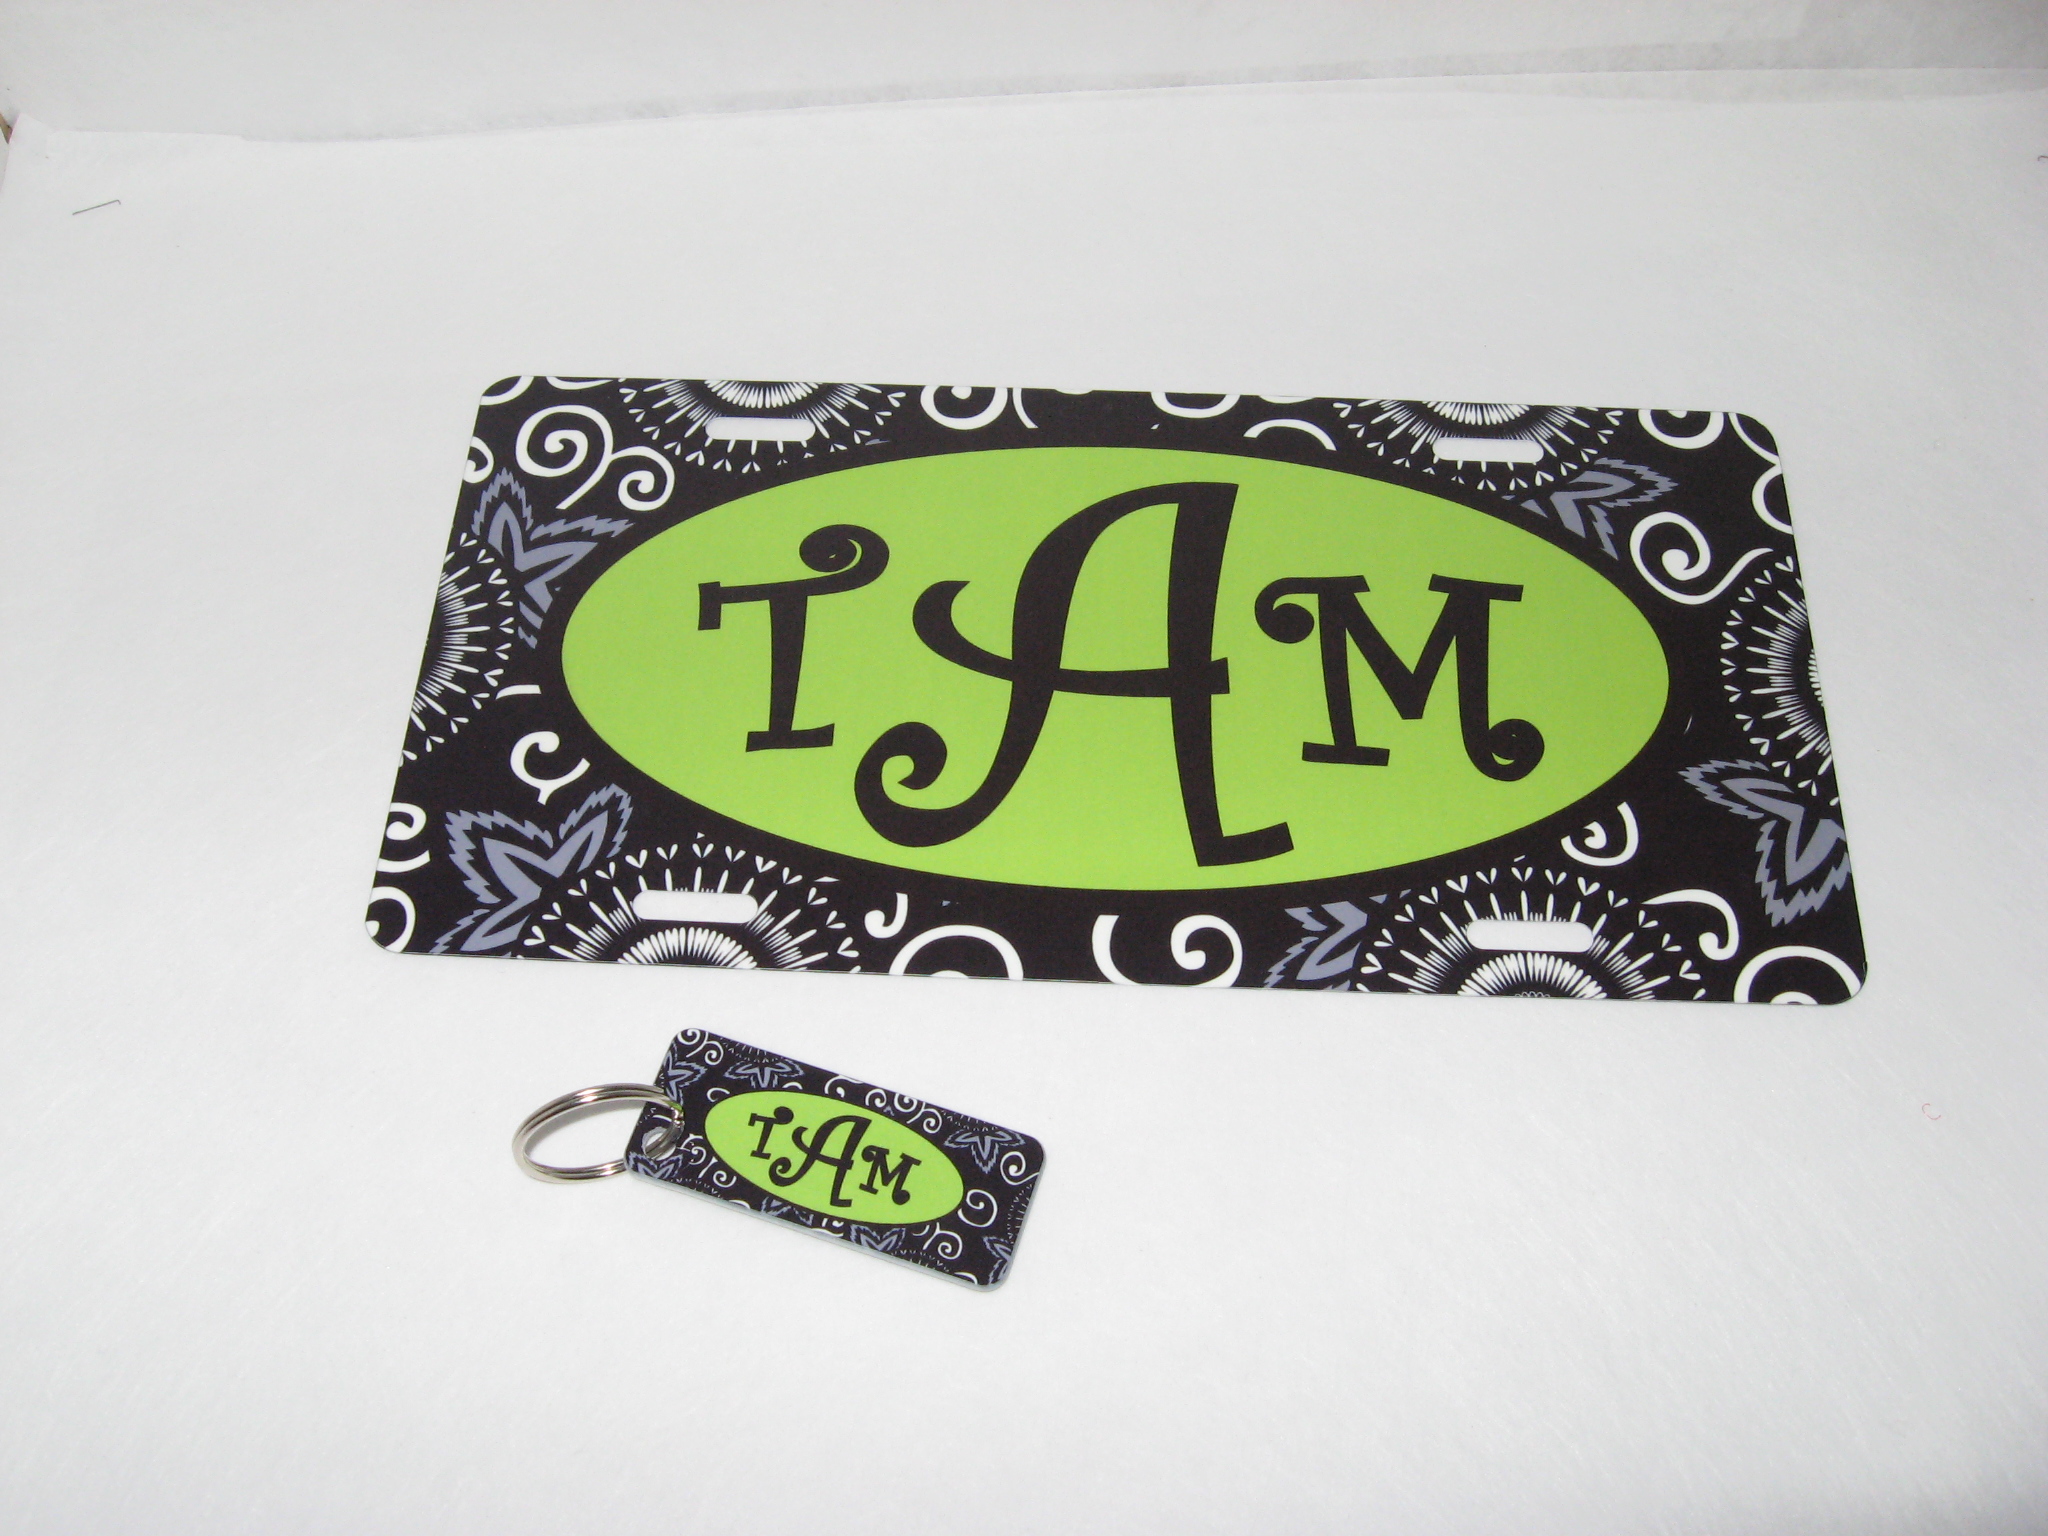 License plate and key fob made with sublimation printing